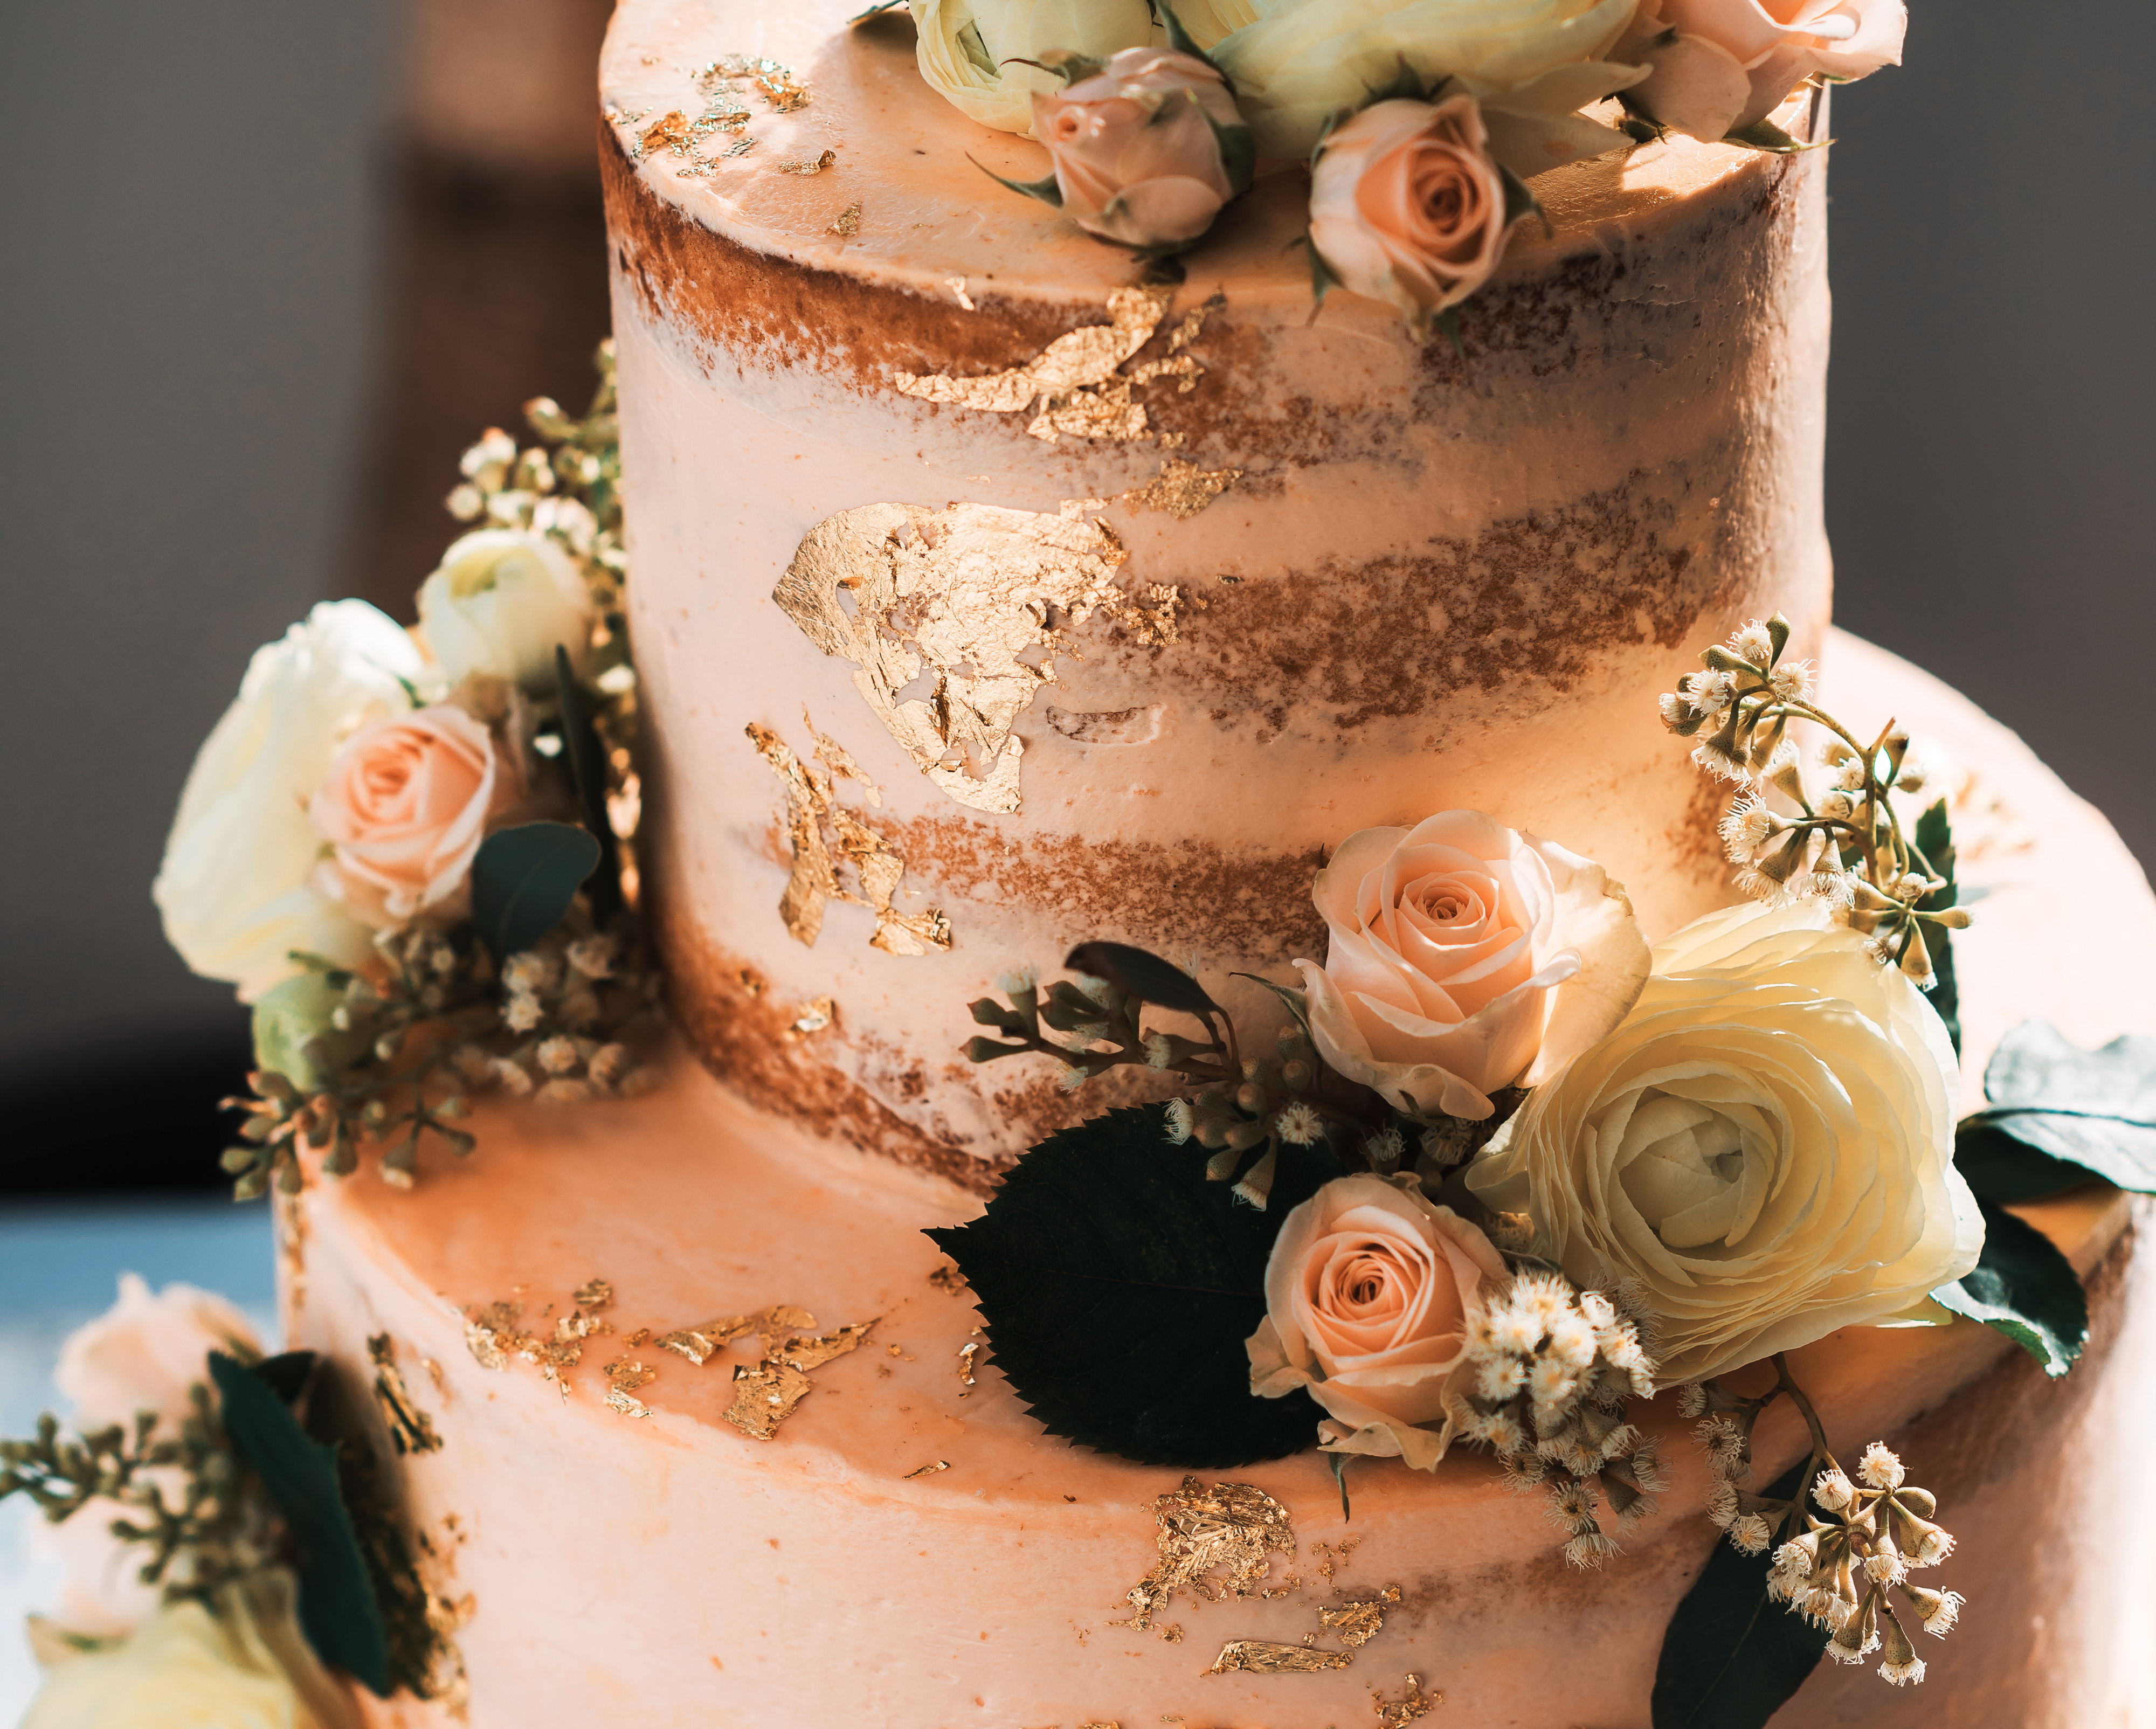 Close-up short of a naked wedding cake with floral and gold accents